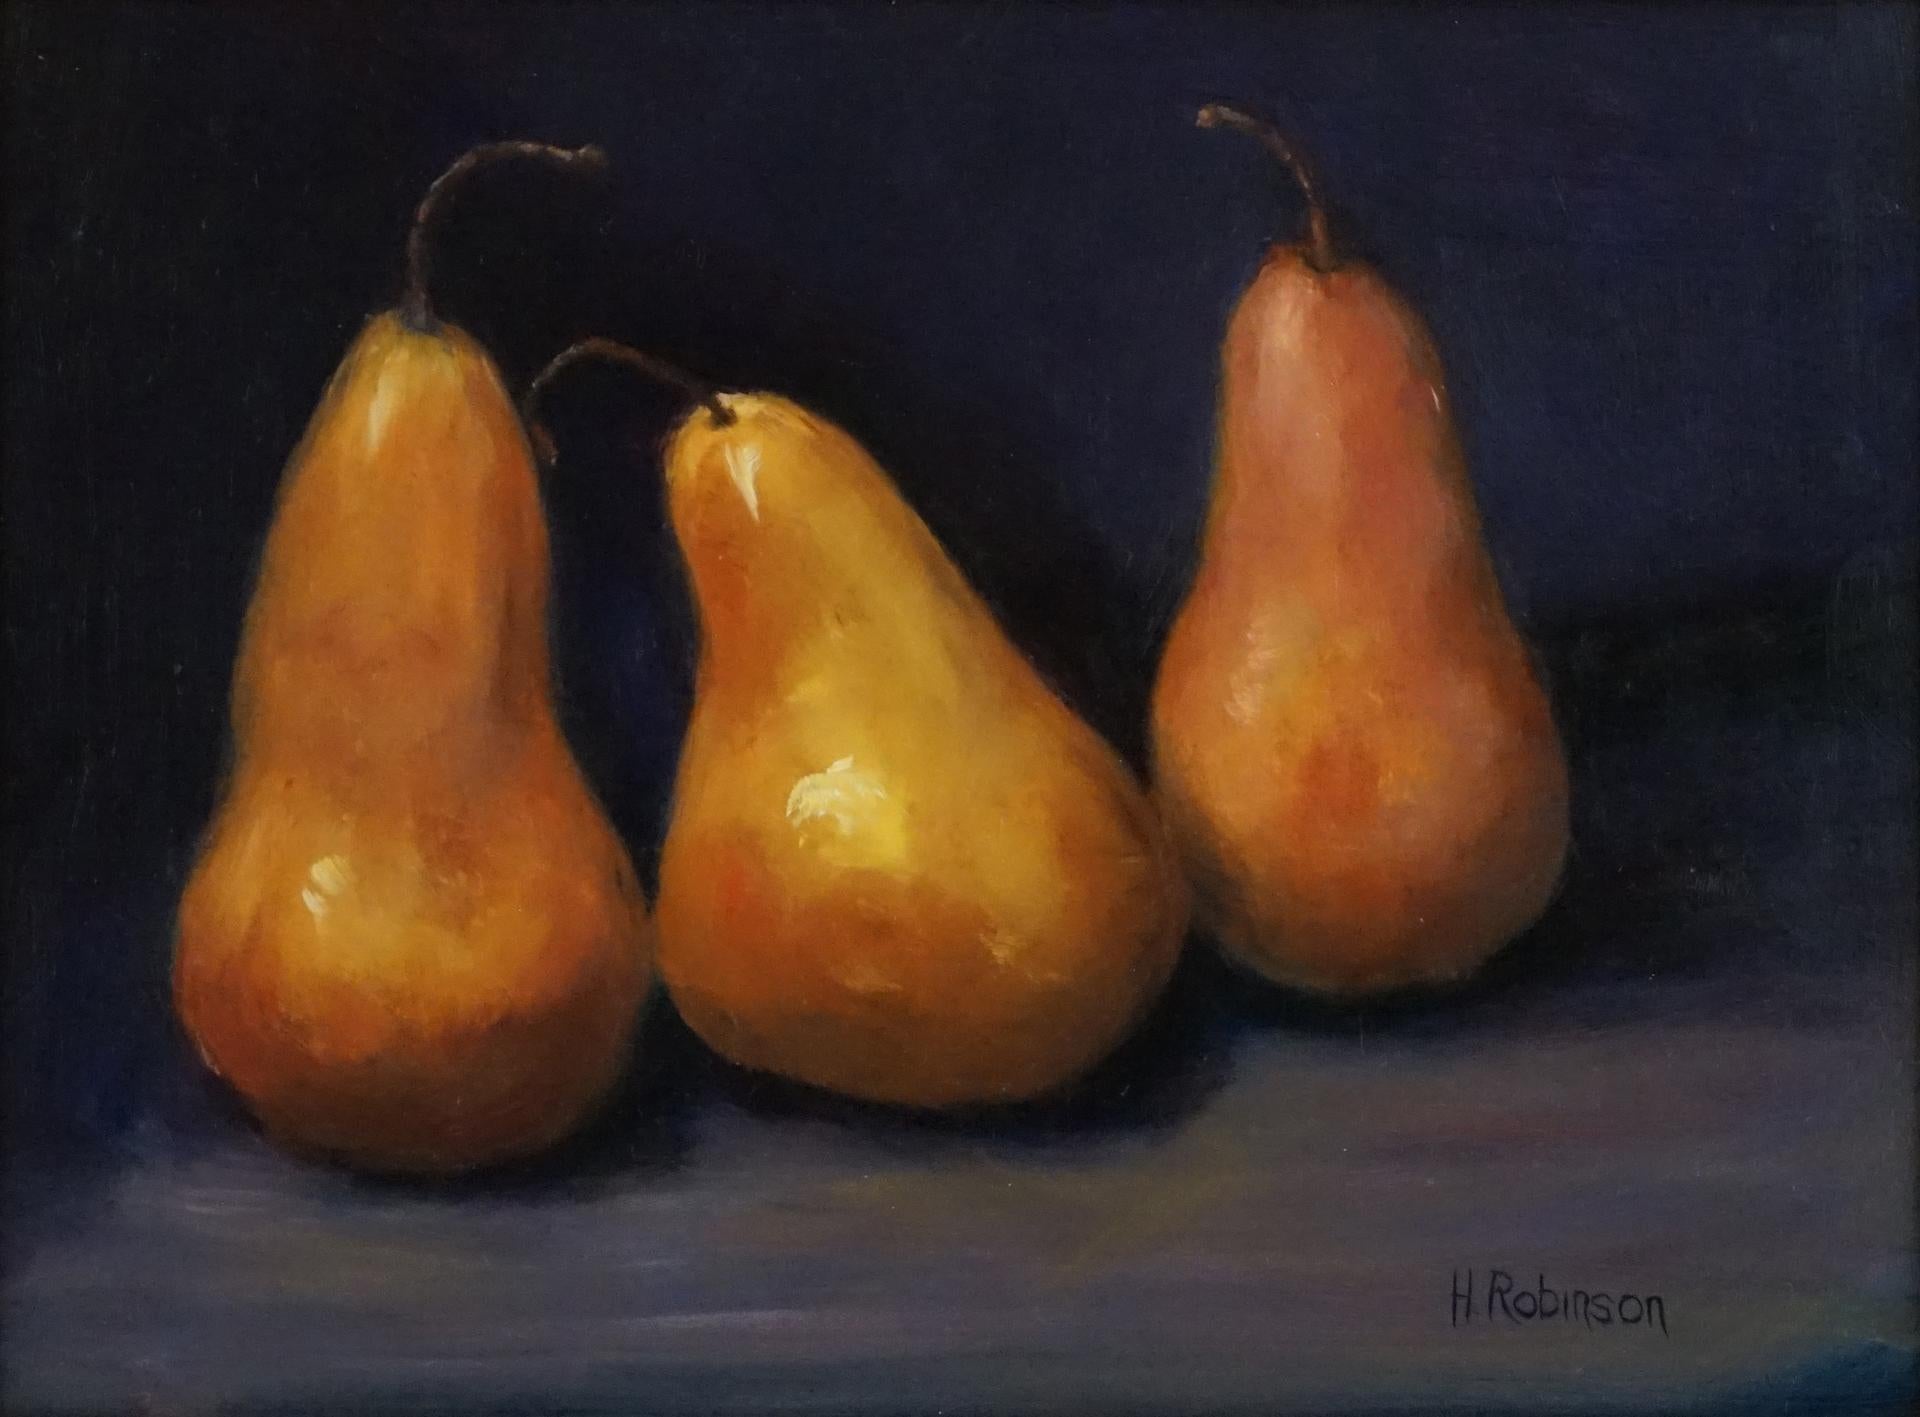  Three Pears    Painted in the Style of Realism, Oil Texas Artist